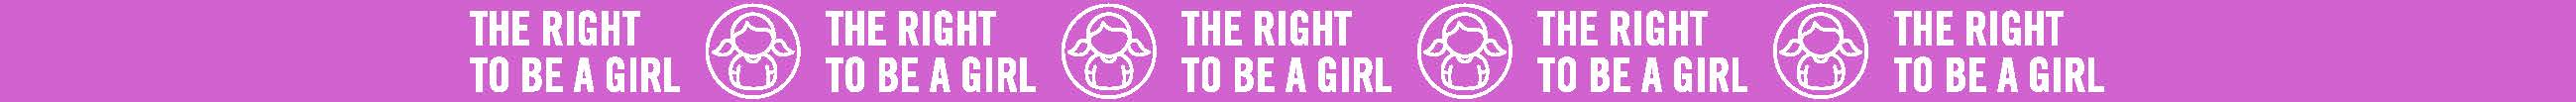 The right to be a girl